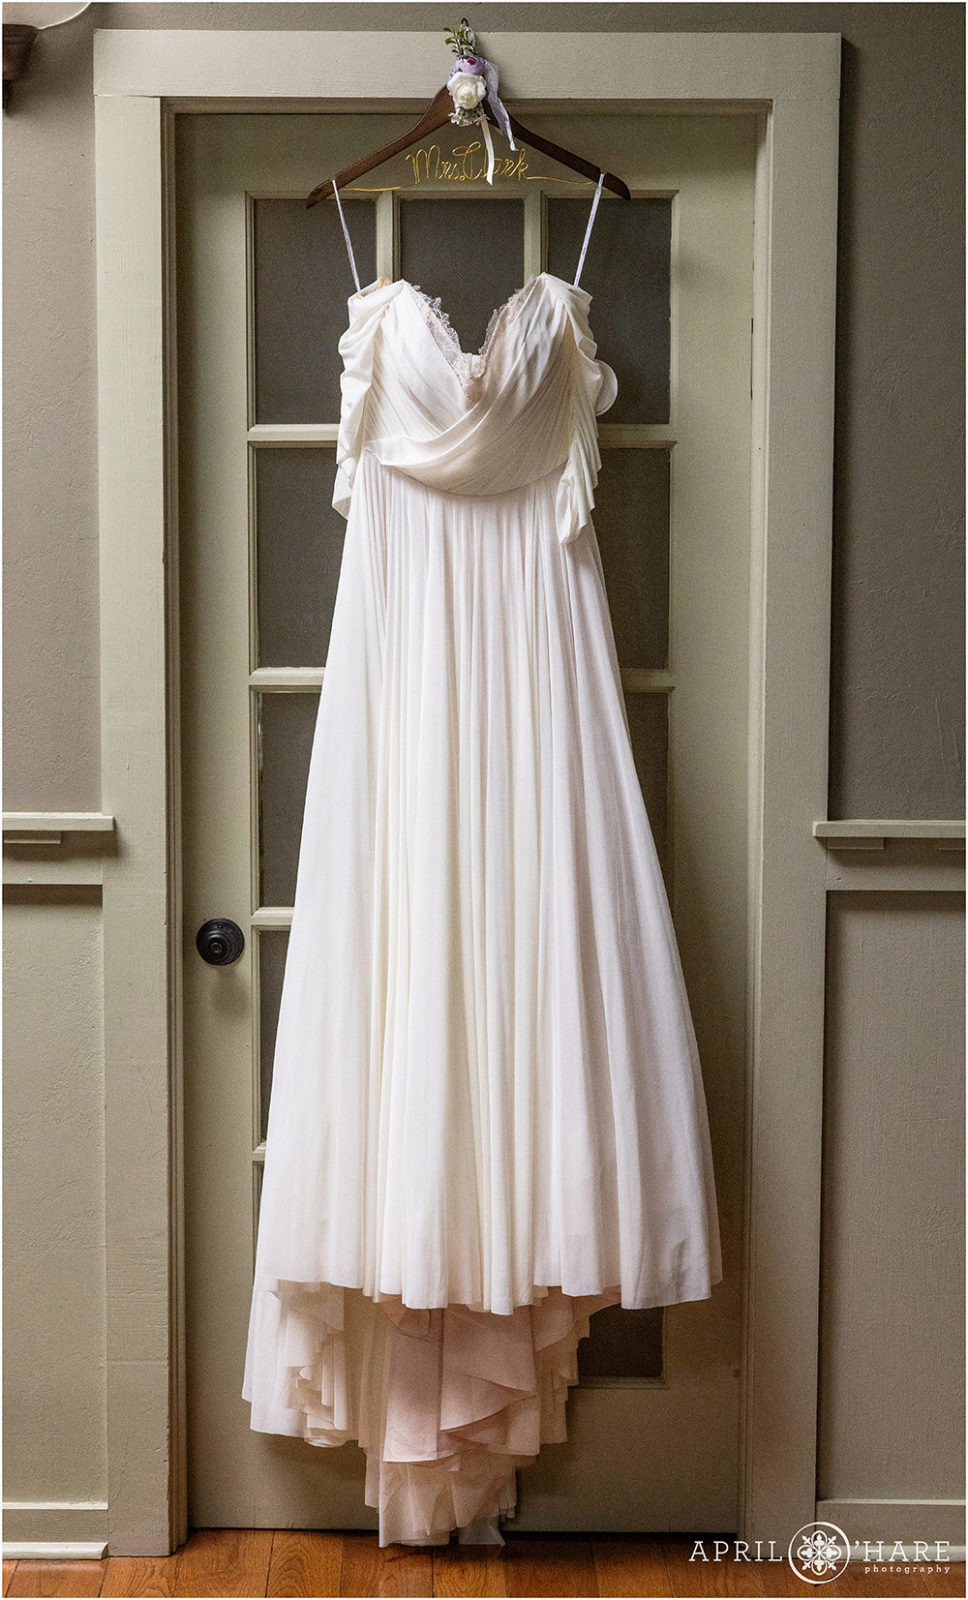 Gown from Emma & Grace Bridal hangs in a doorway at an Evergreen Colorado wedding